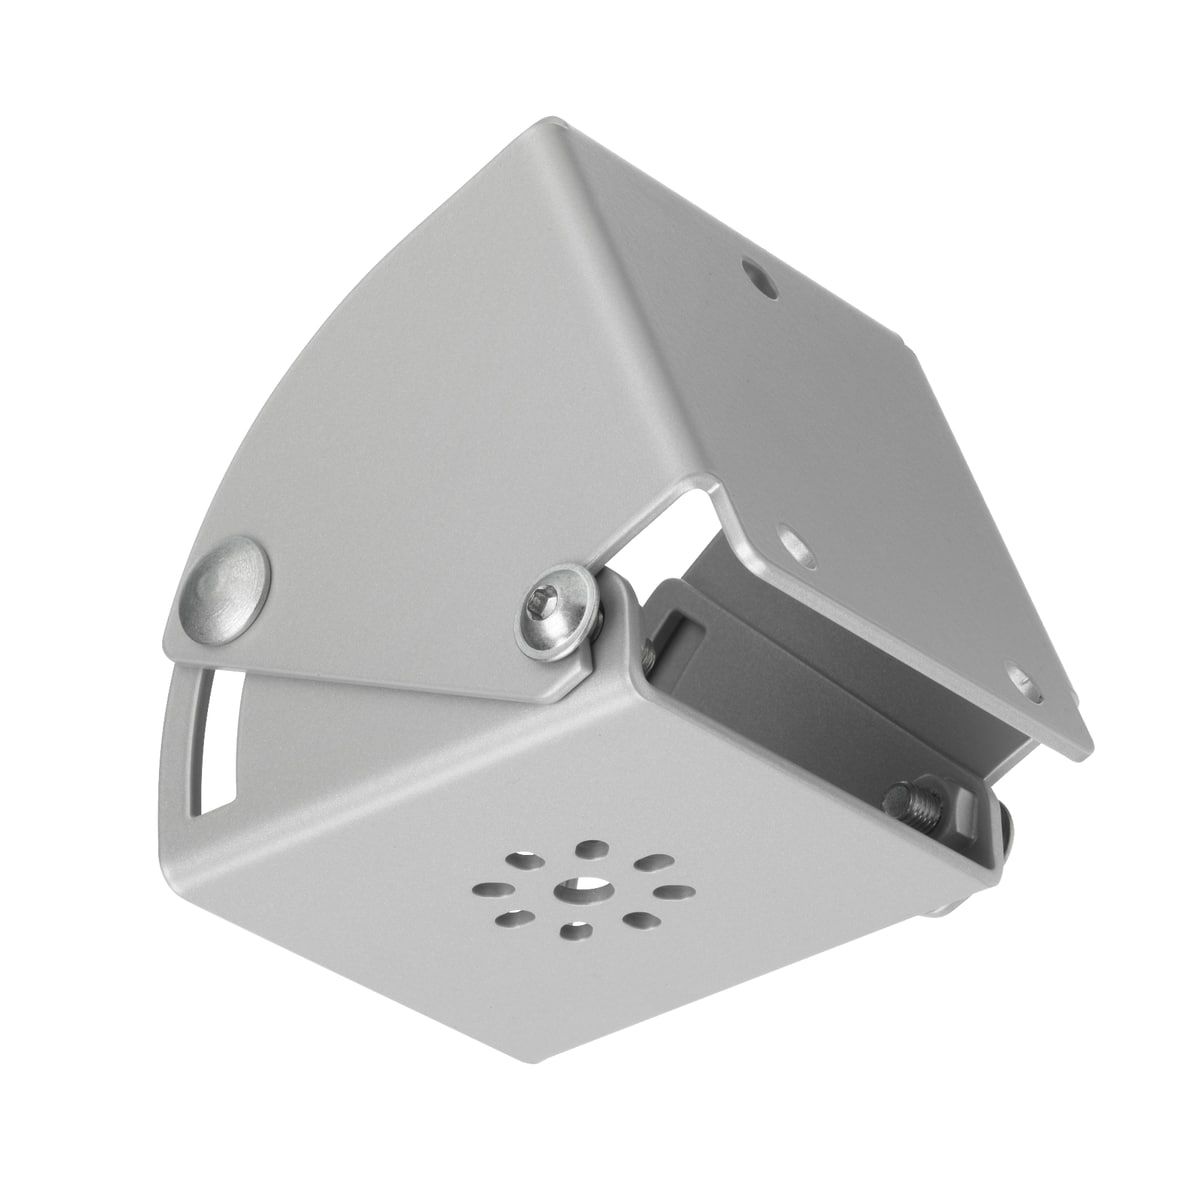 Vogel's PUC 1030 Ceiling plate turn and tilt